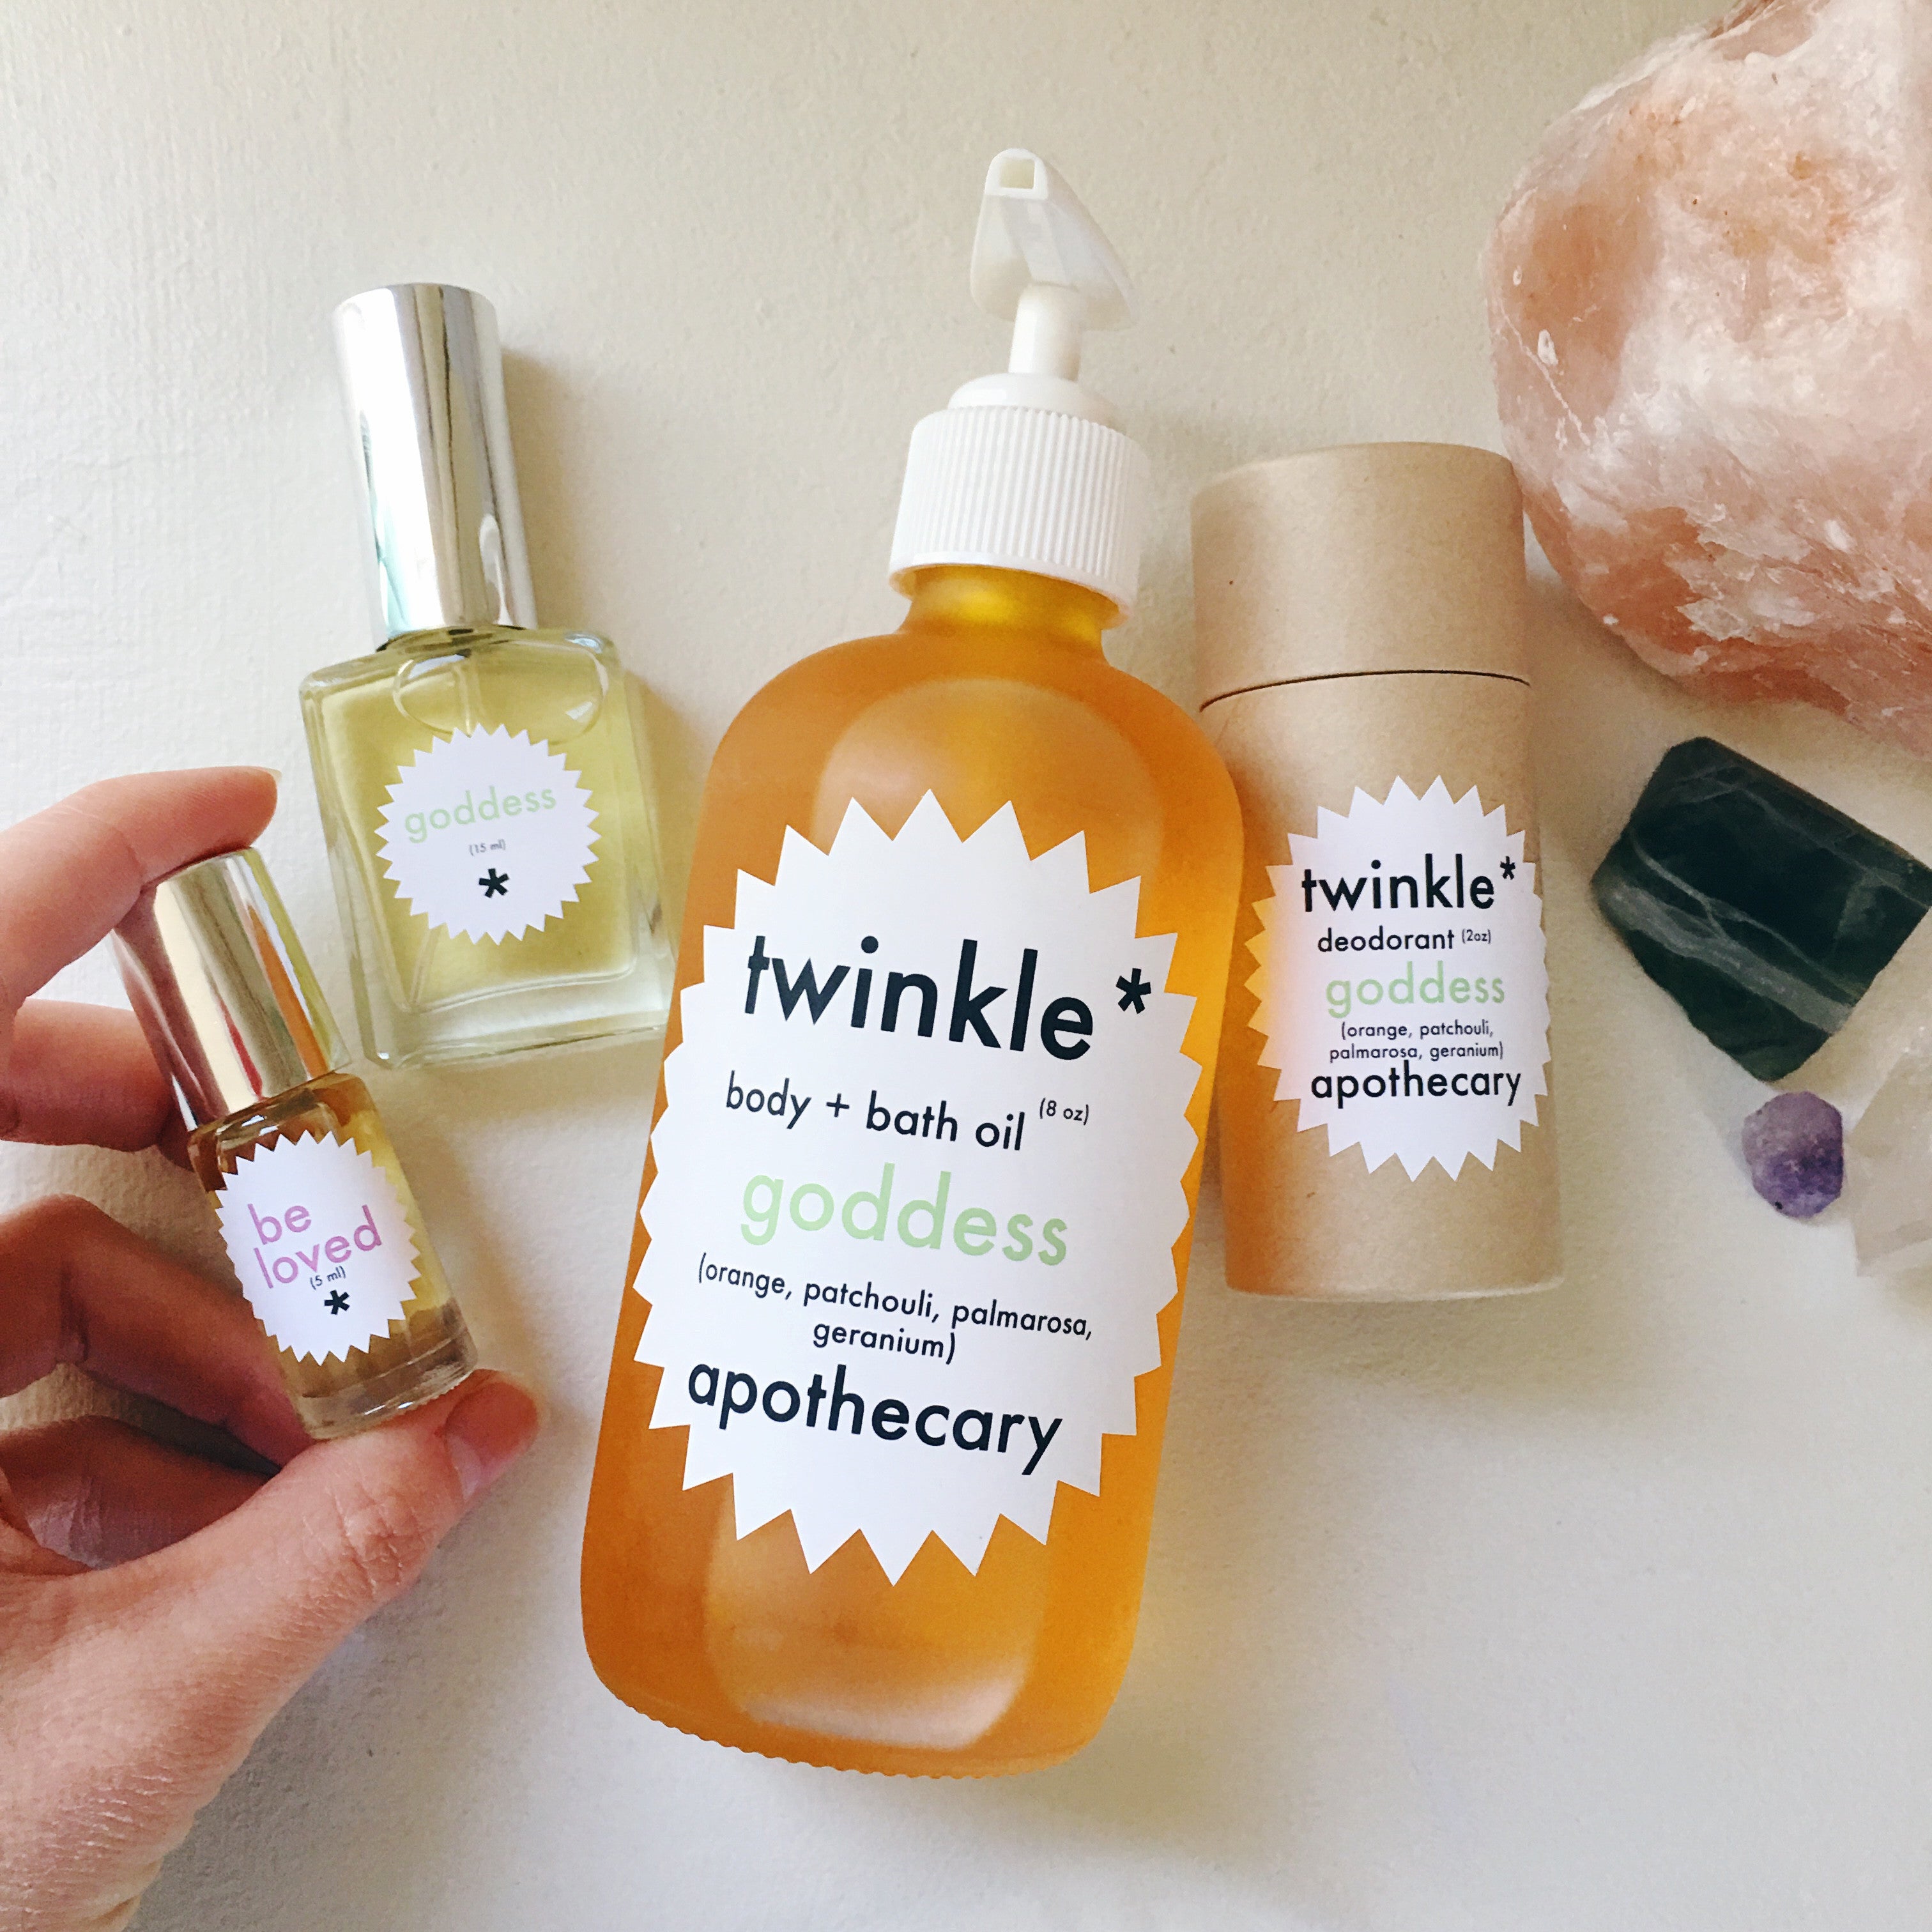 goddess body oil deodorant and perfume twinkle apothecary 